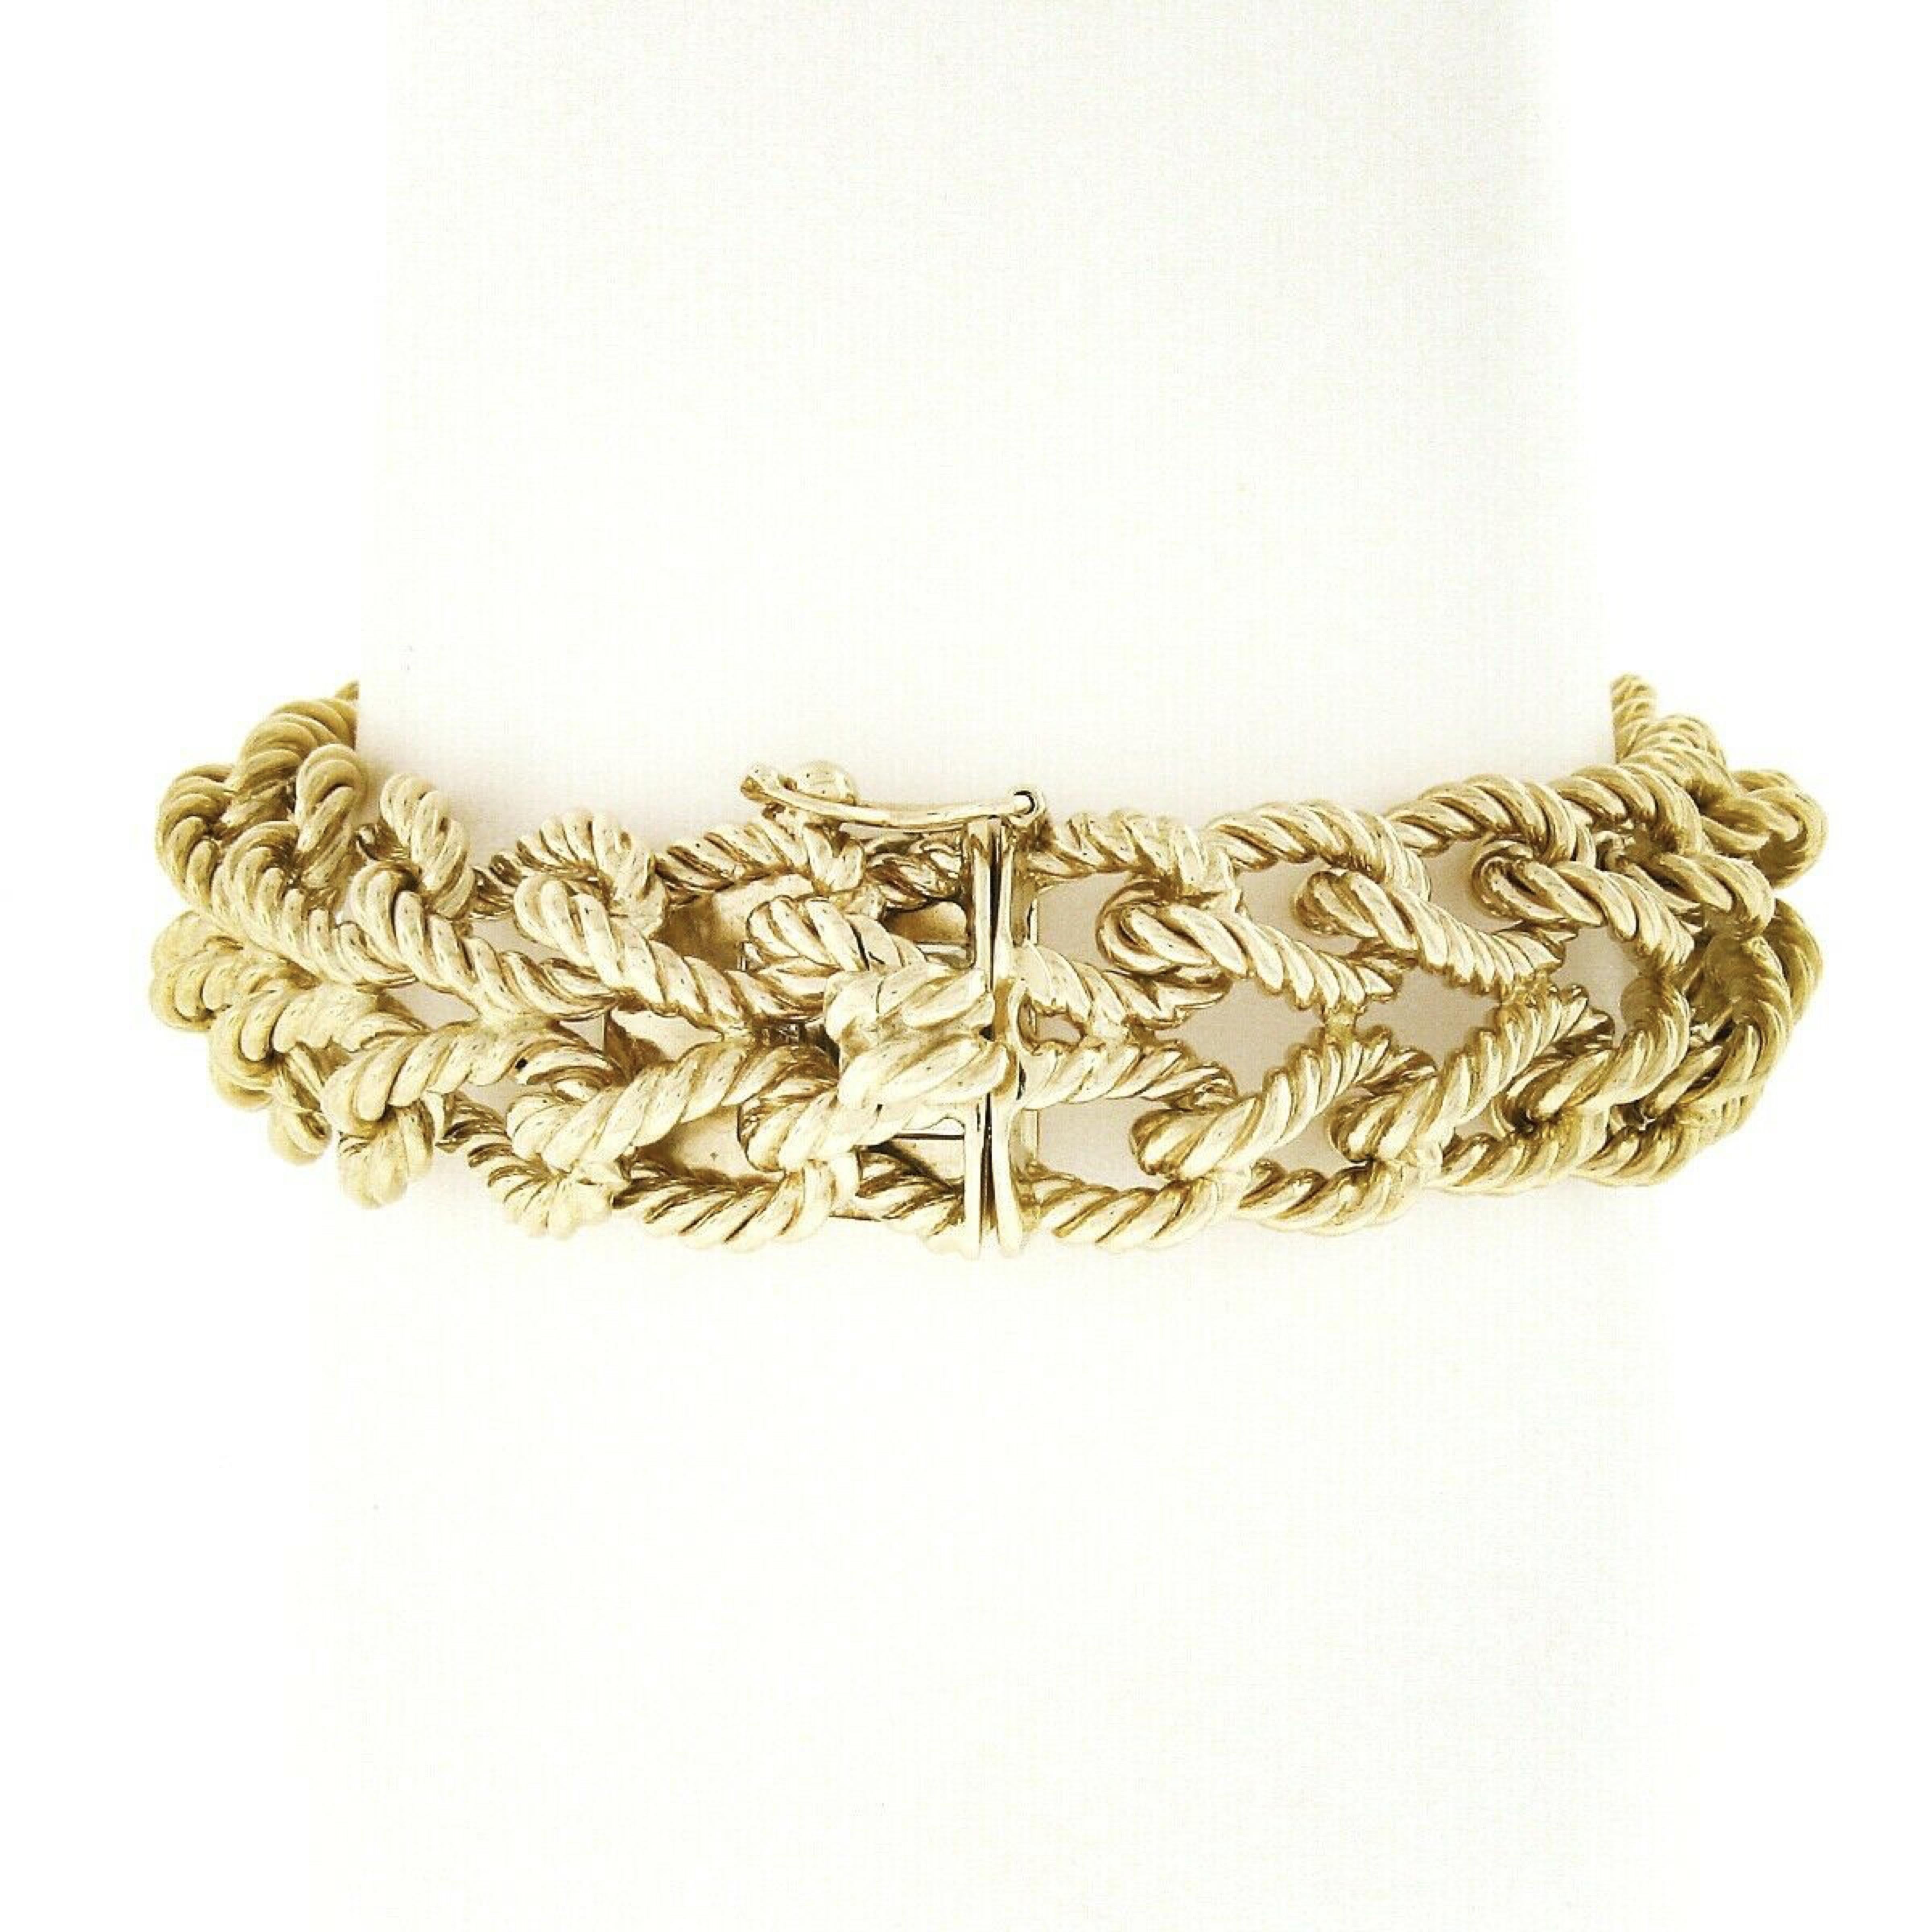 You are looking at an absolutely magnificent vintage Tiffany & Co. bracelet crafted in solid 14k yellow gold. The bracelet features two rows of twisted wire cable links that elegantly interlock throughout with a nice high-polished finish and